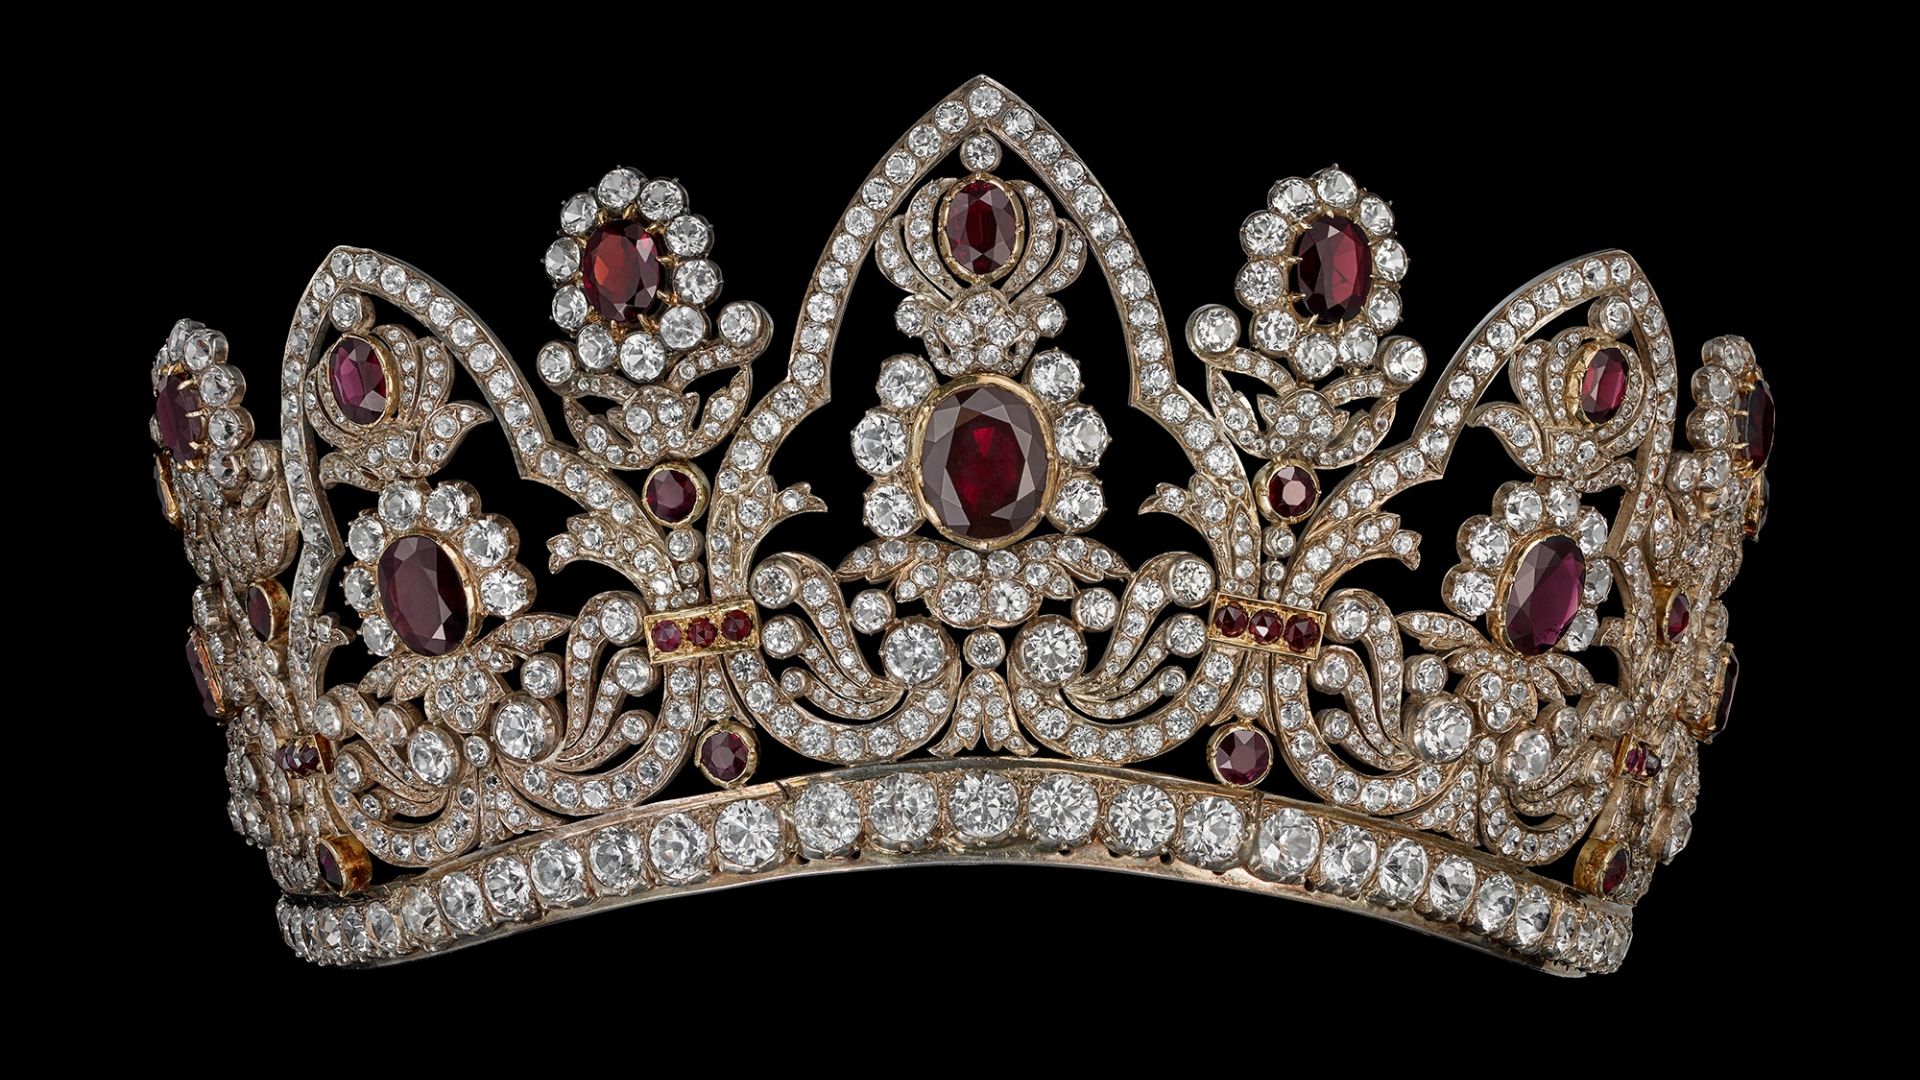 Chaumet - The tiara that crowns the finger. Discover more about